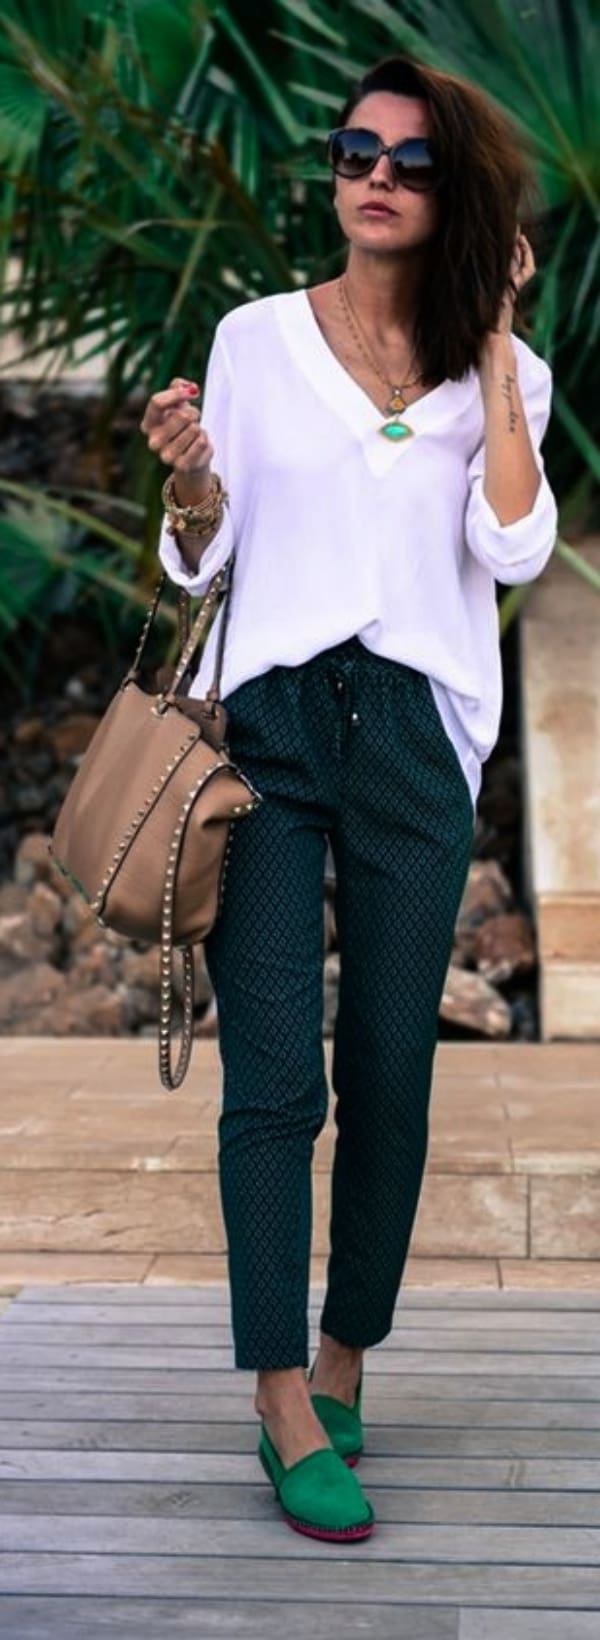 smart casual women's outfits 2018